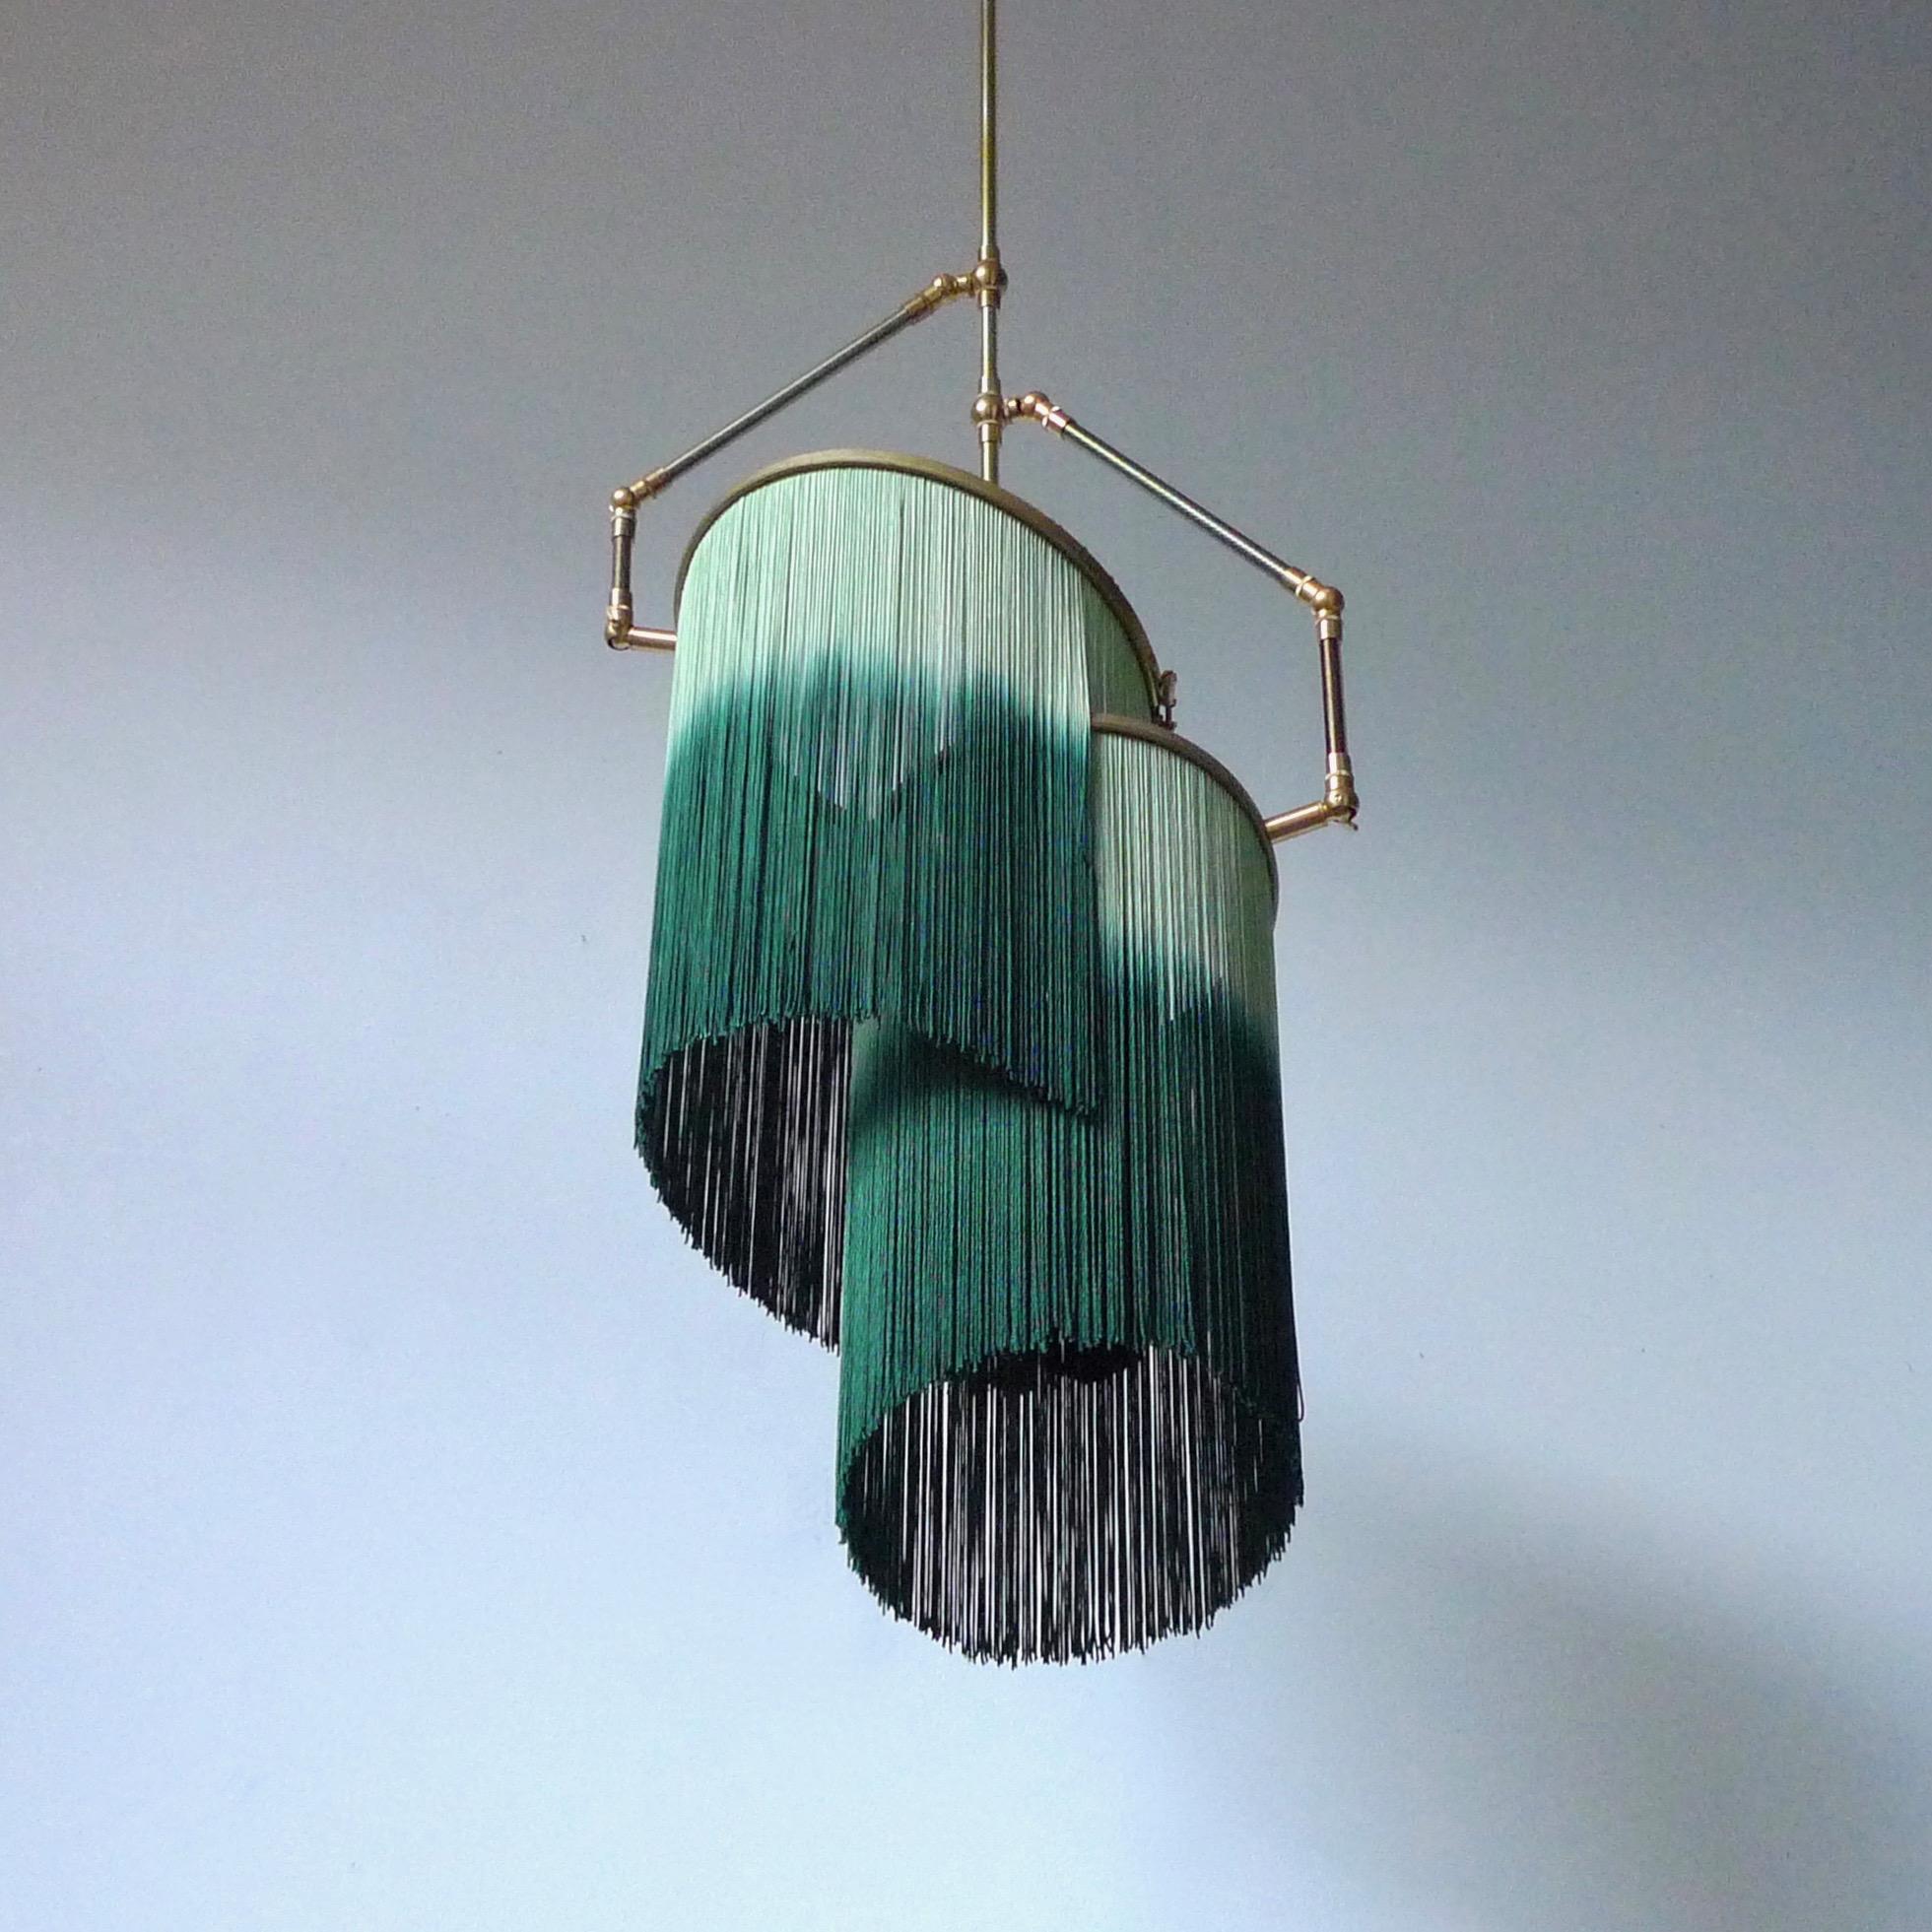 Green charme pendant lamp, Sander Bottinga

Dimensions: H 65 (can be customized) x W 38 x D 25 cm
Hand-Sculpted in brass, leather, wood and dip dyed colored Fringes in viscose.
The movable arms makes it possible to move the circles with fringes